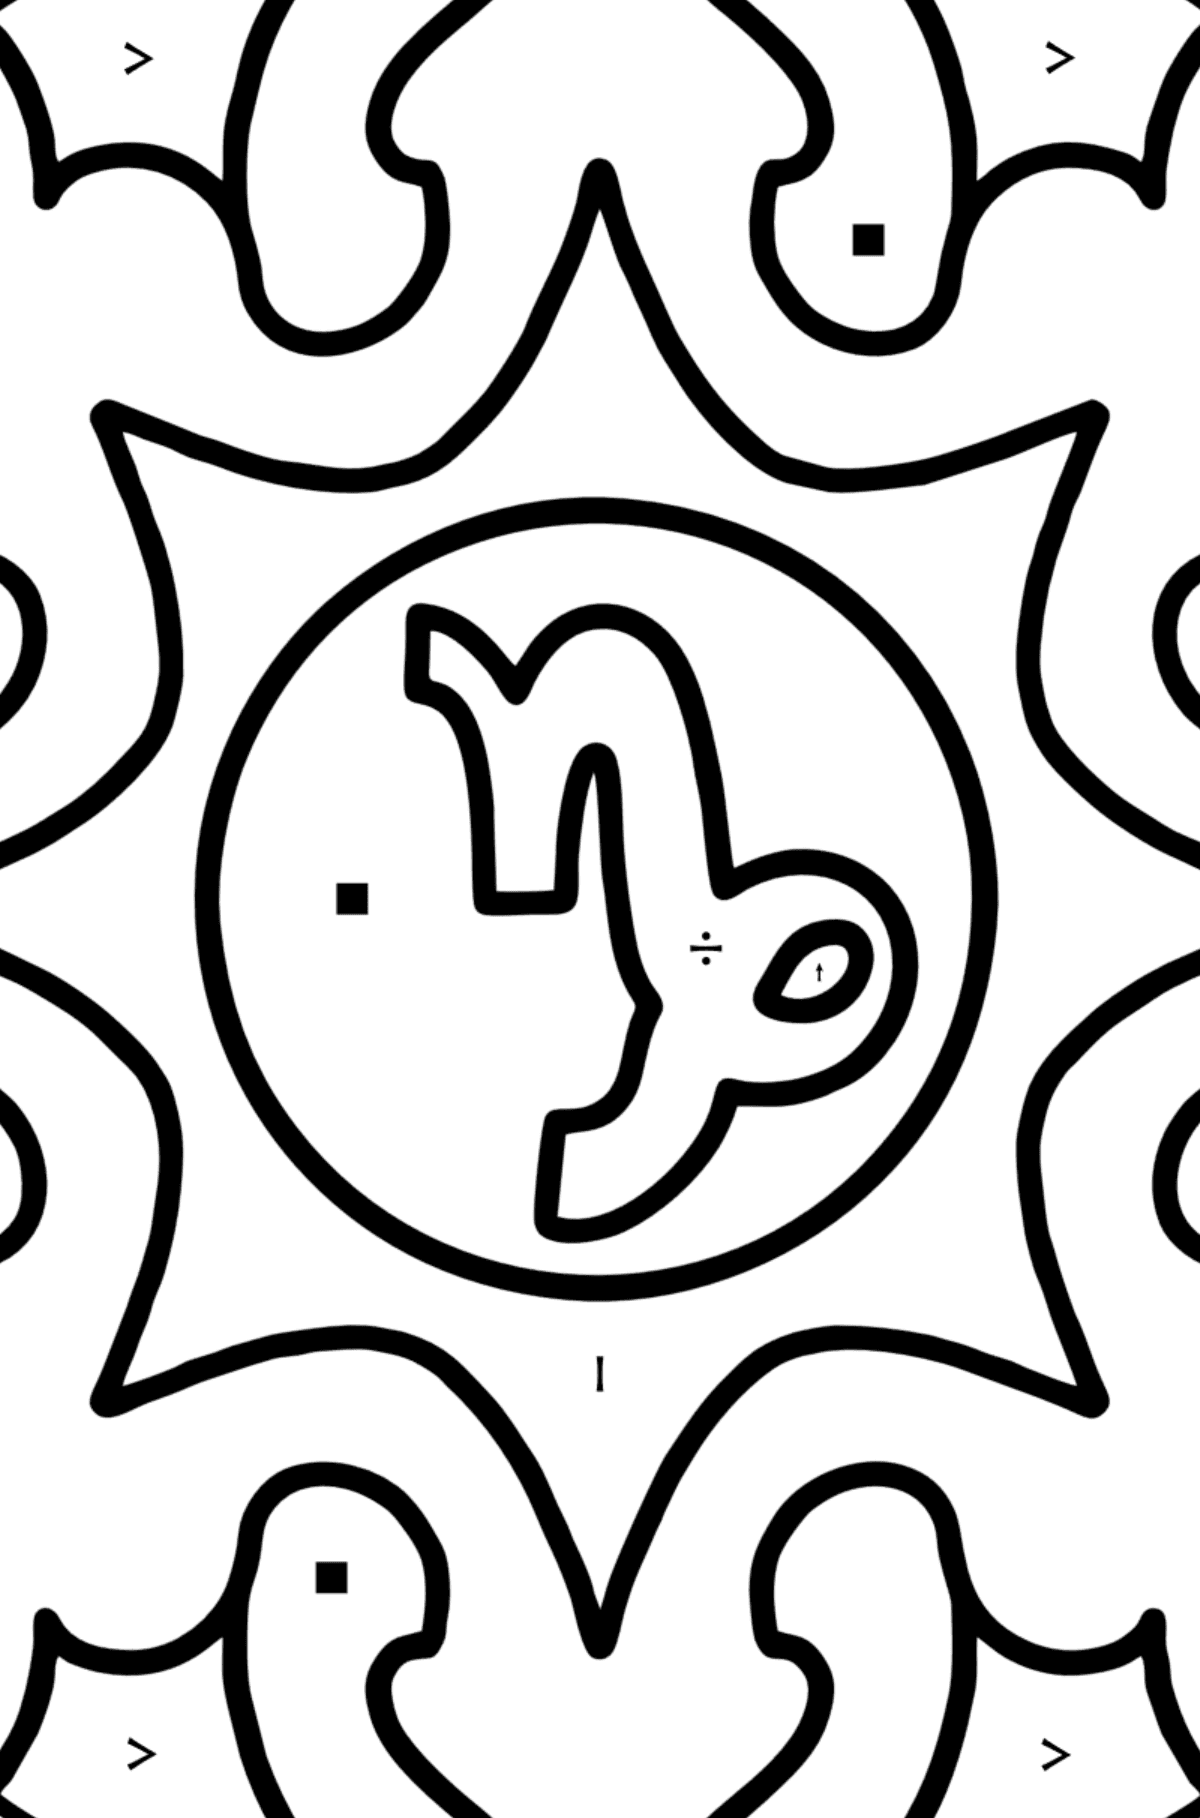 Coloring page - Capricorn zodiac sign - Coloring by Symbols for Kids